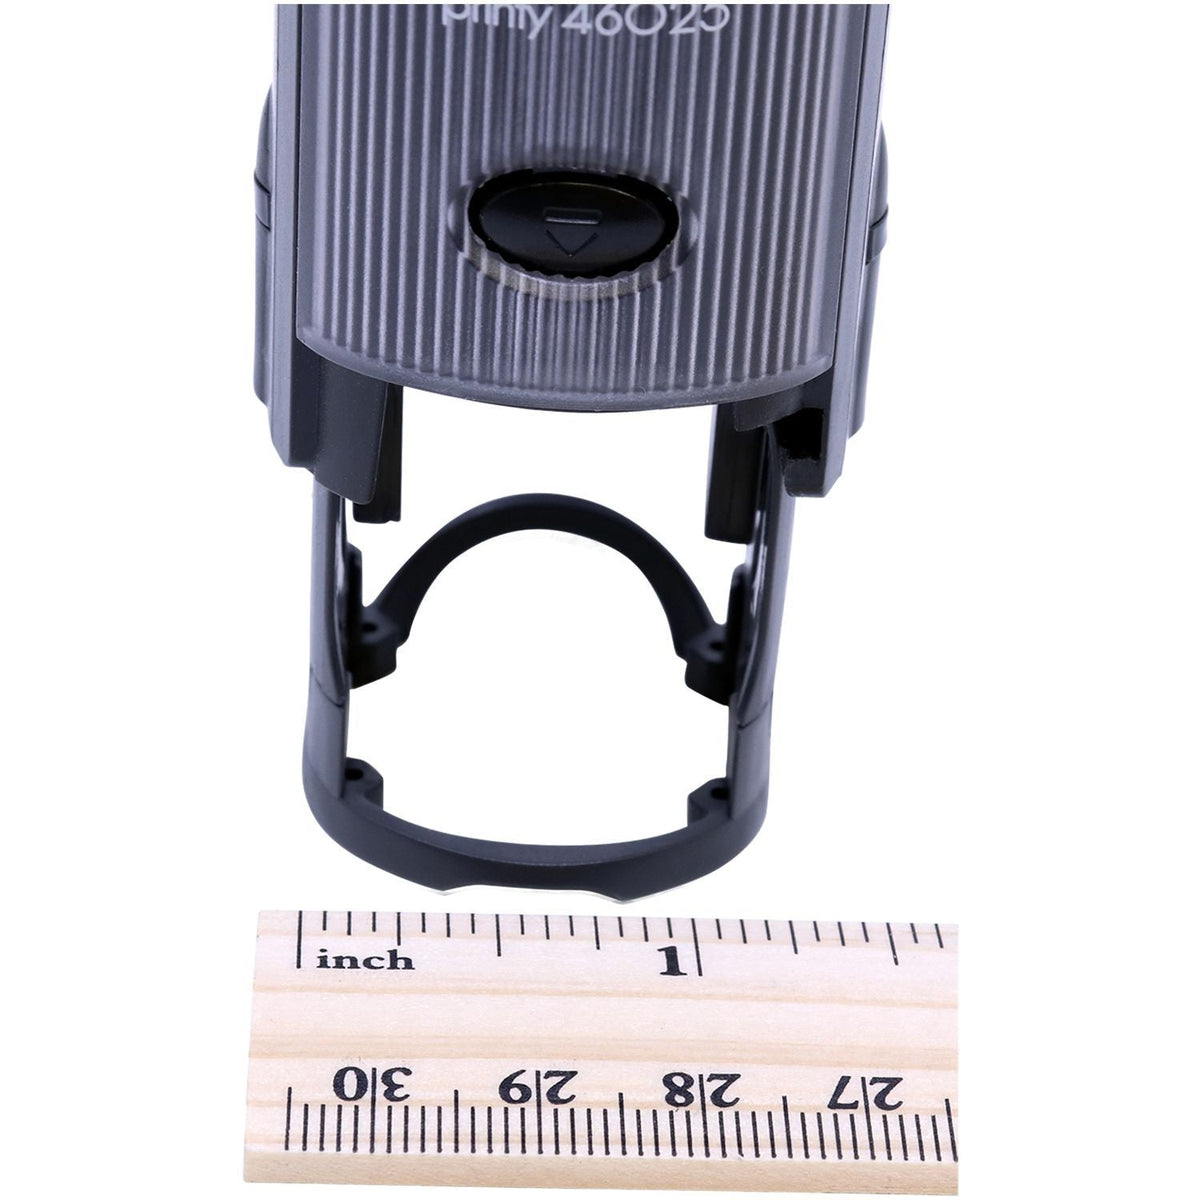 Measurment of Self-Inking Round Correct and Return Stamp with Ruler